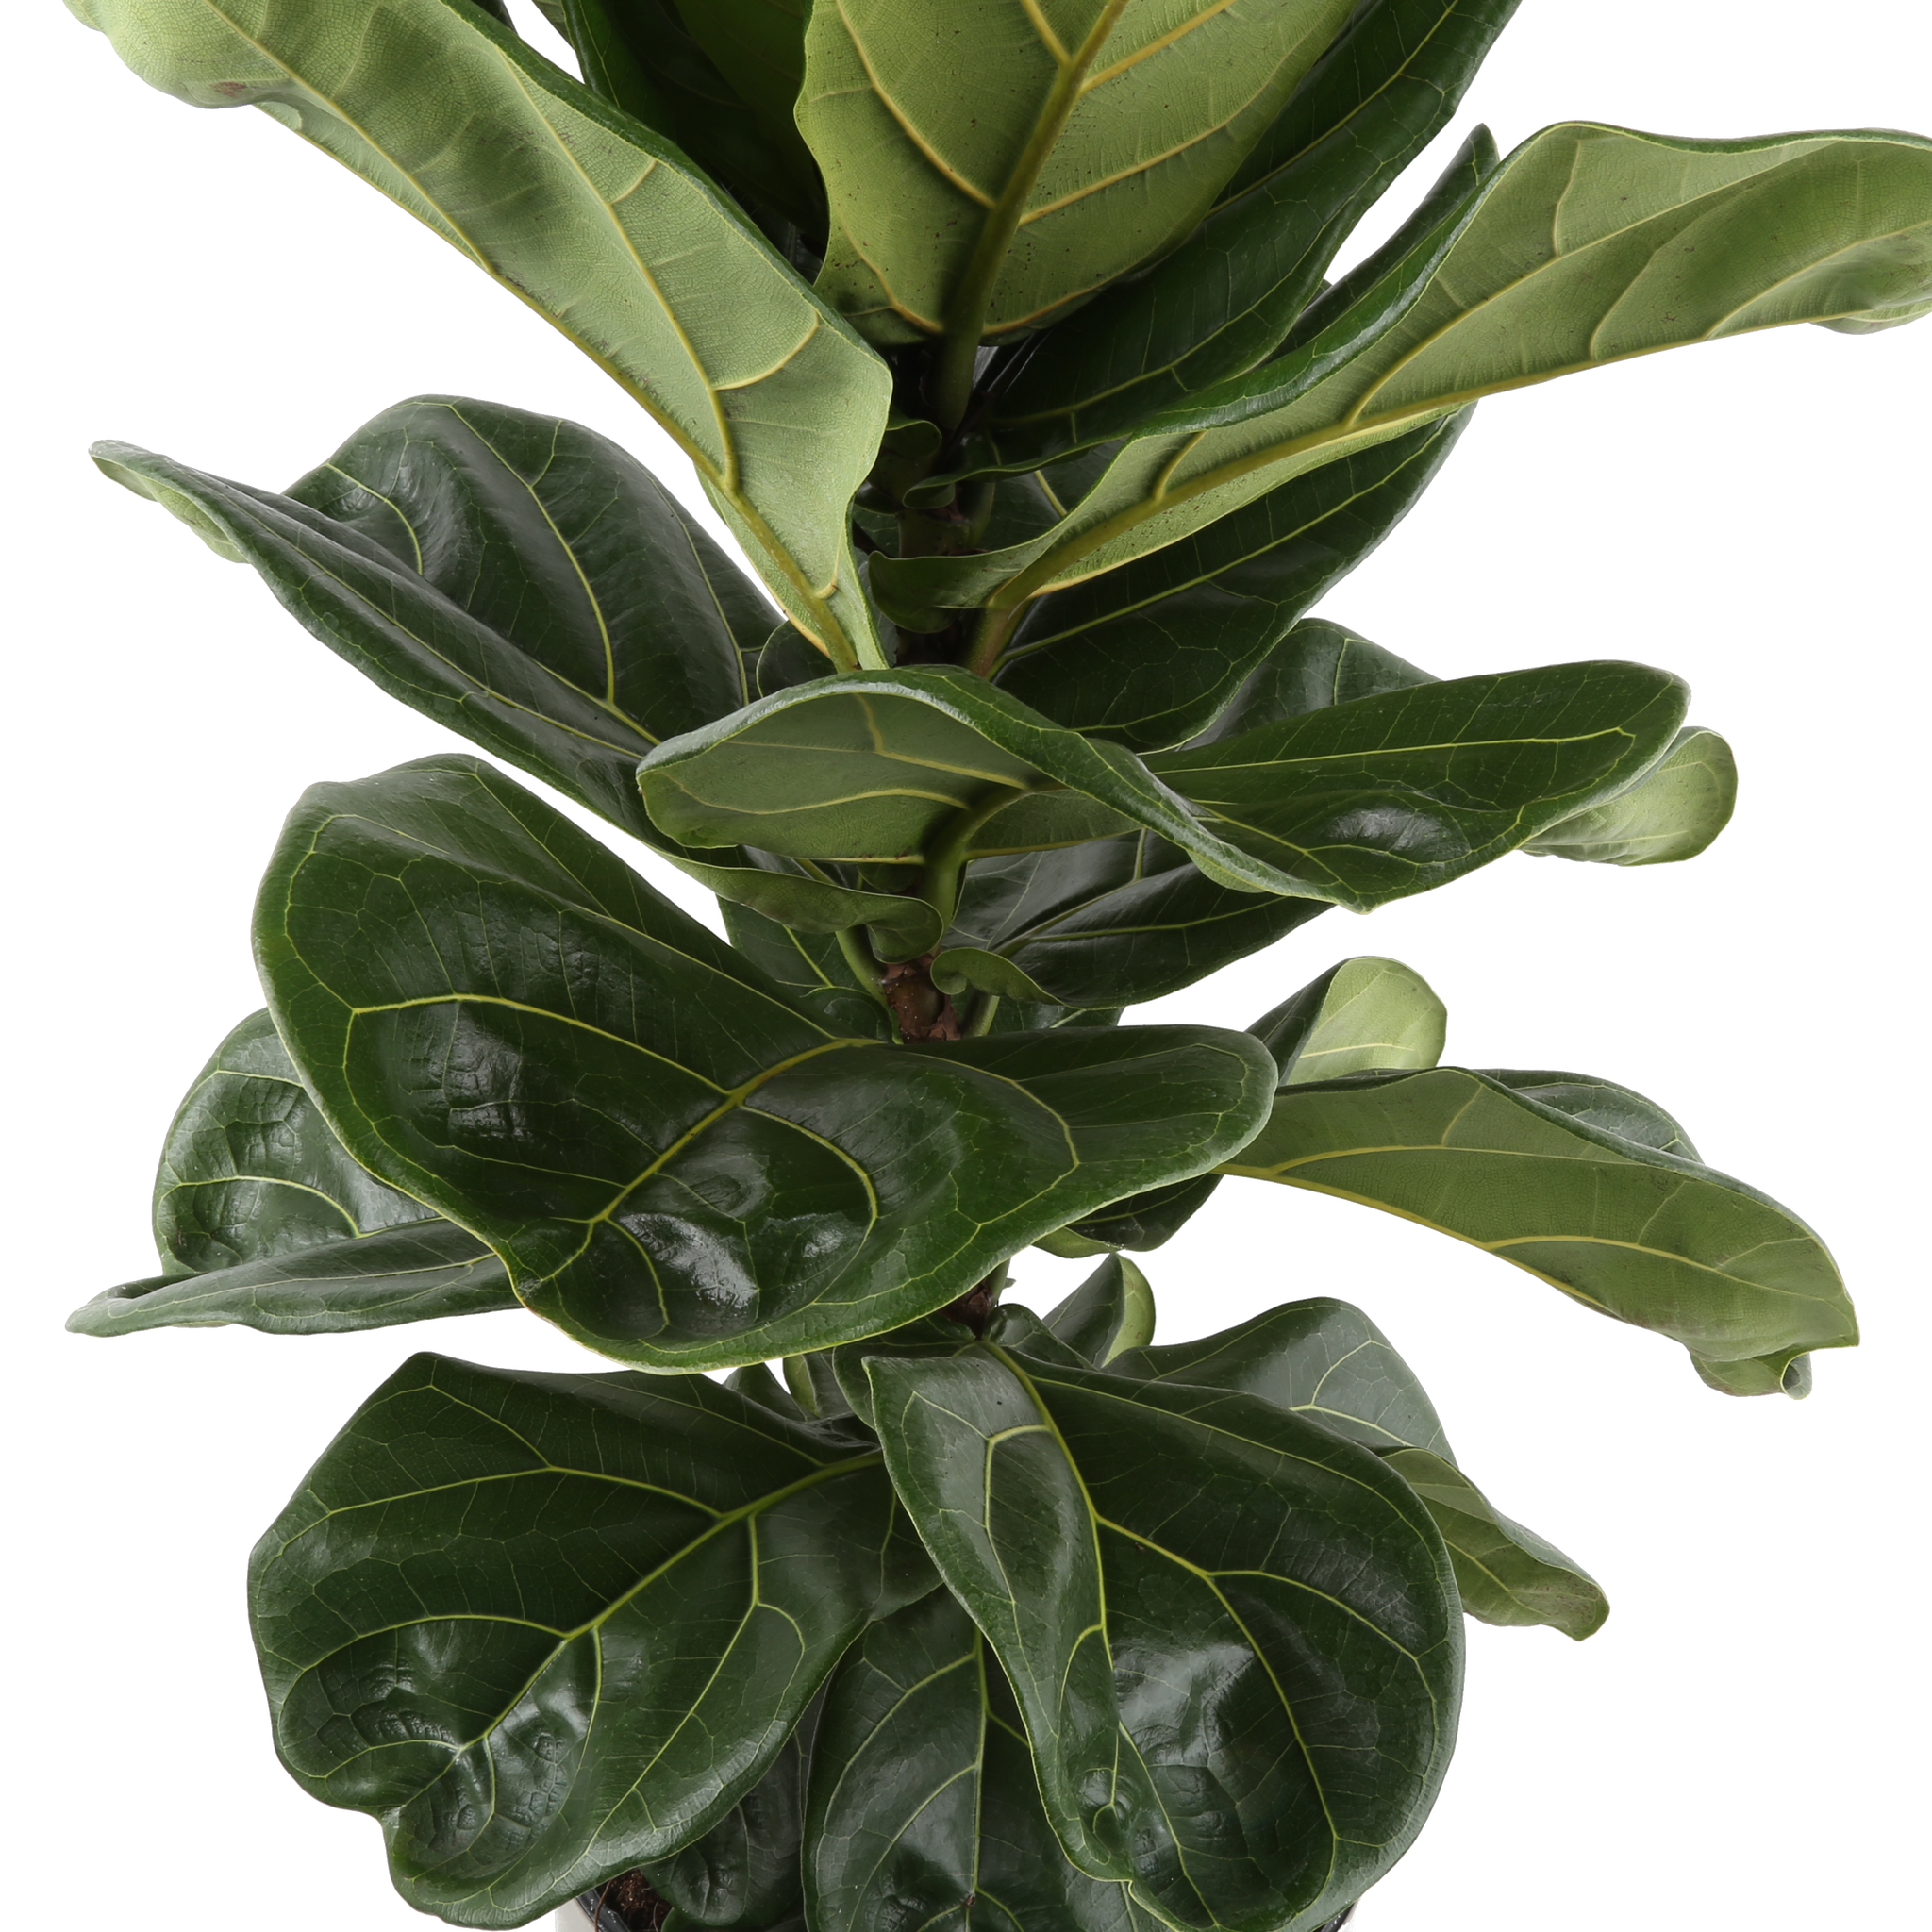 detail view of ficus lyrata standard leaves, they are dark green and shiny with yellowish veins